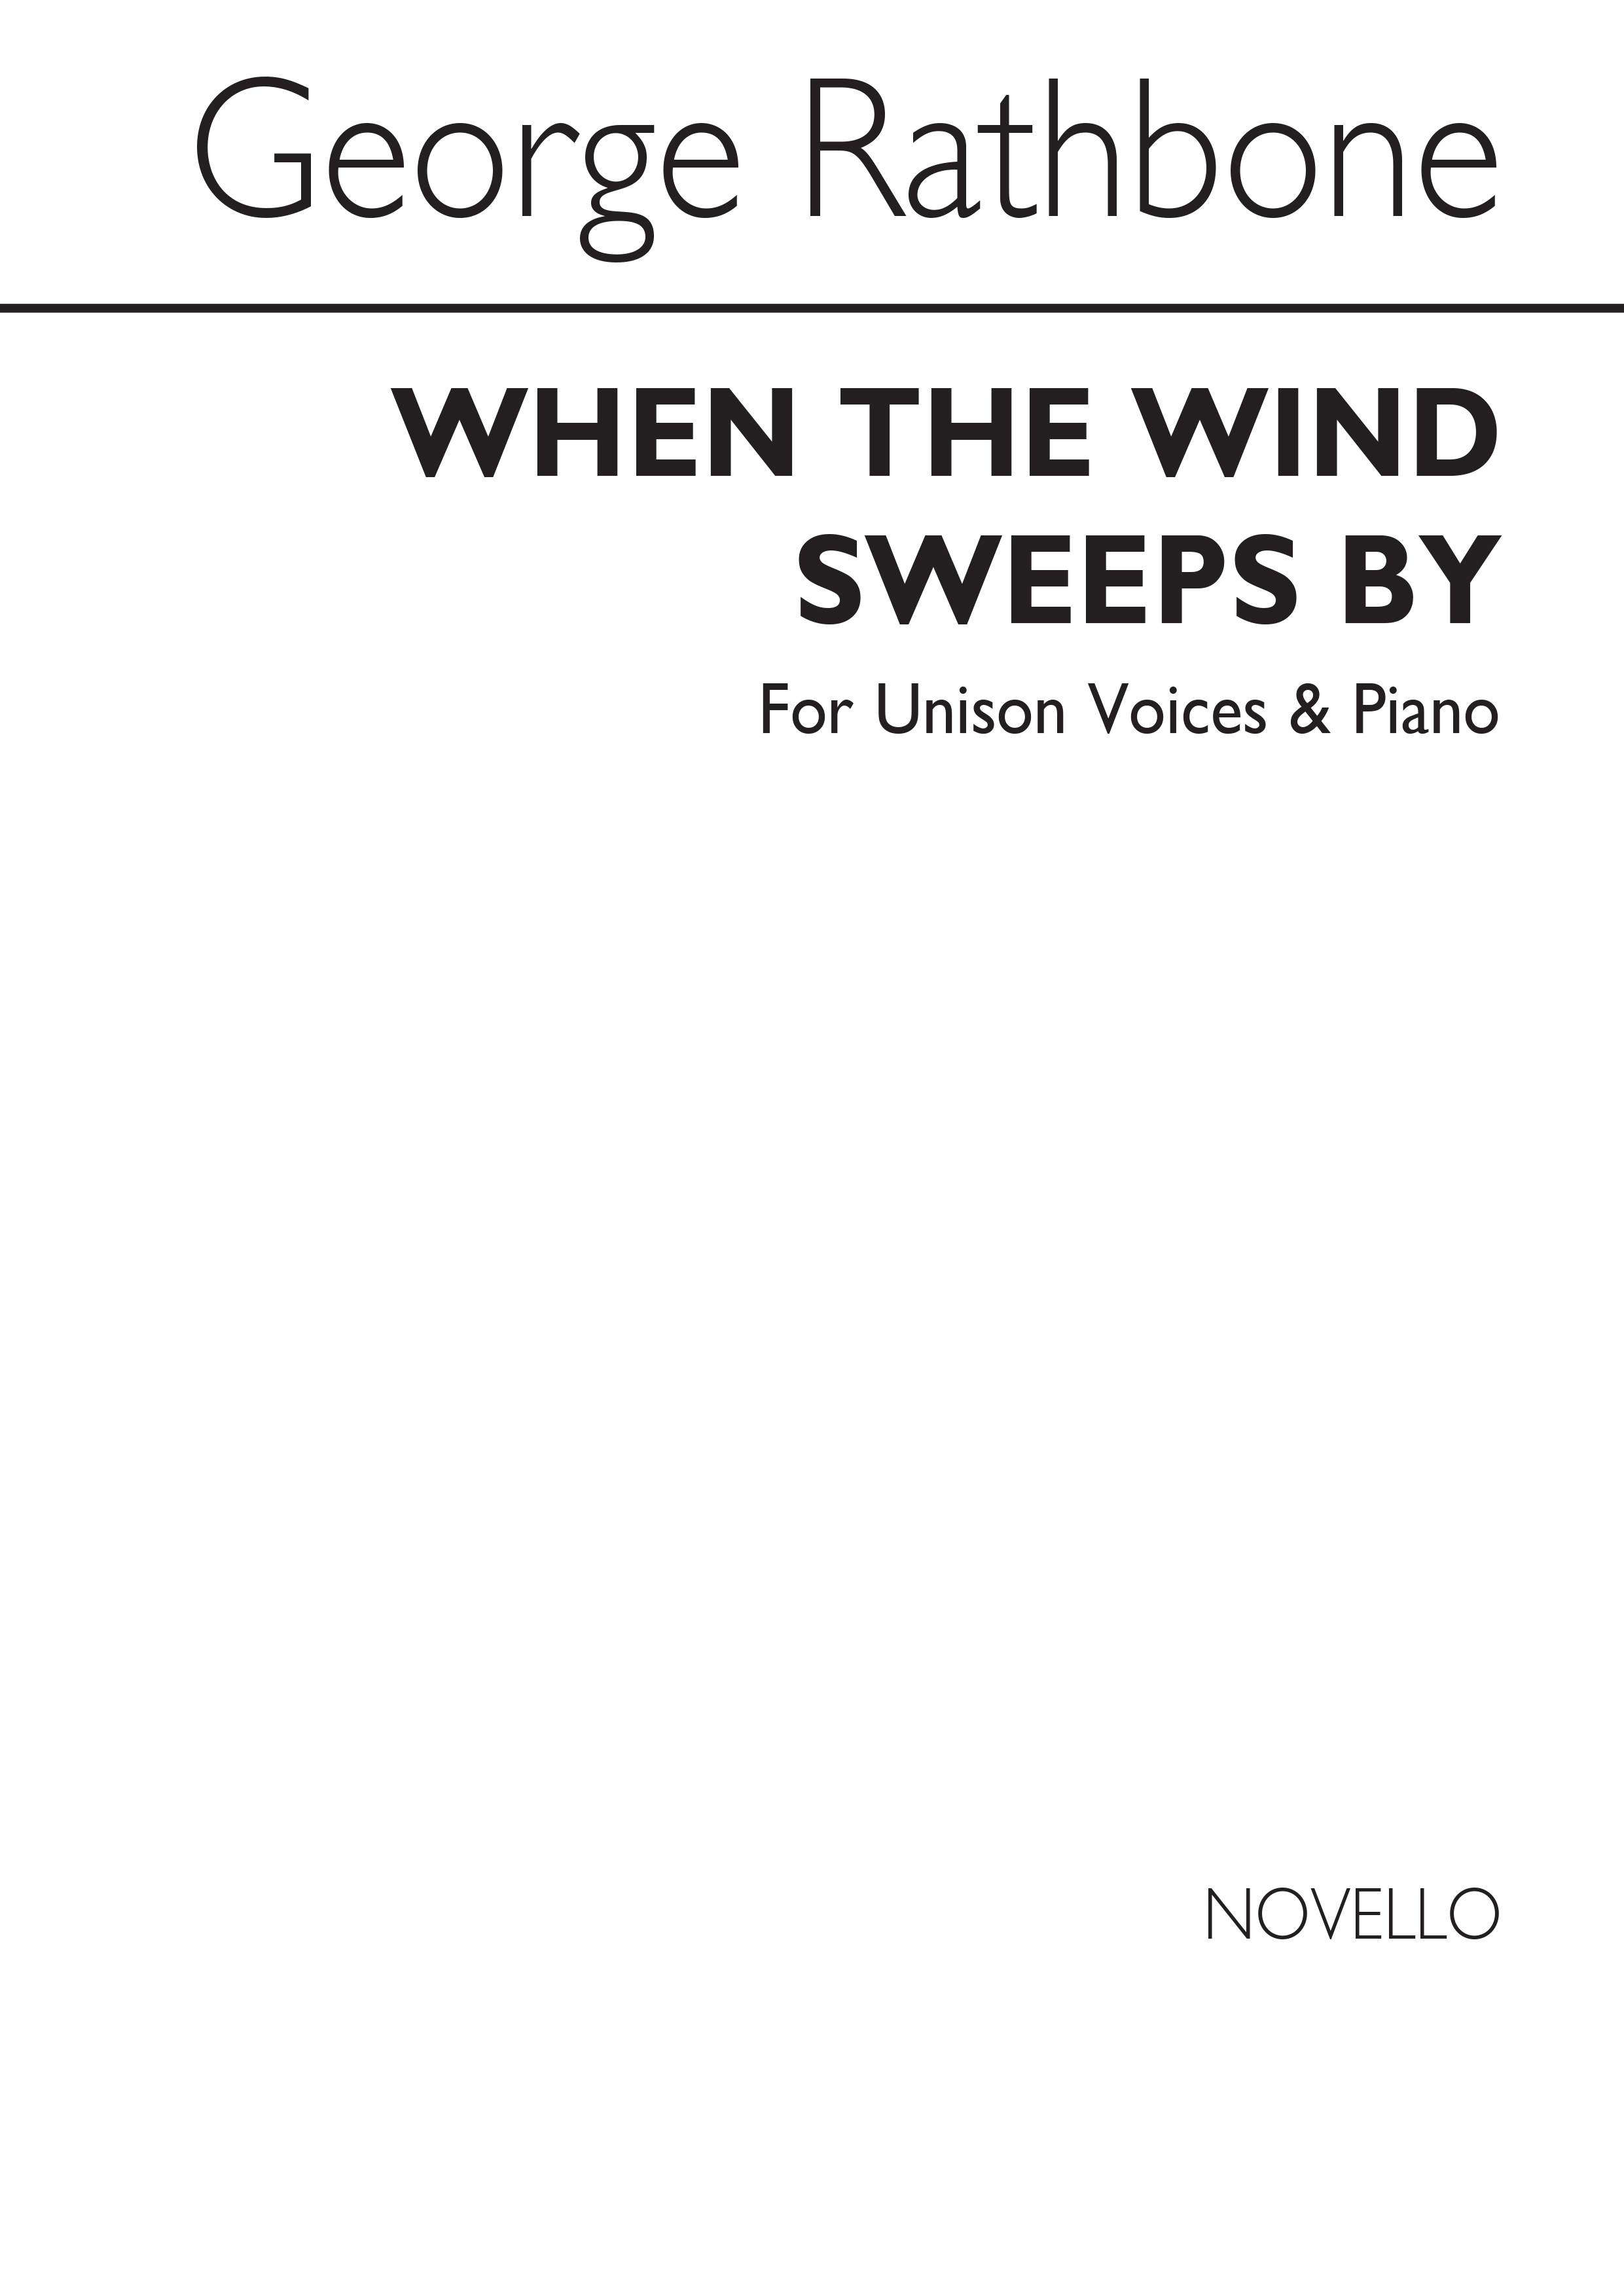 George Rathbone: When The Wind Sweeps By